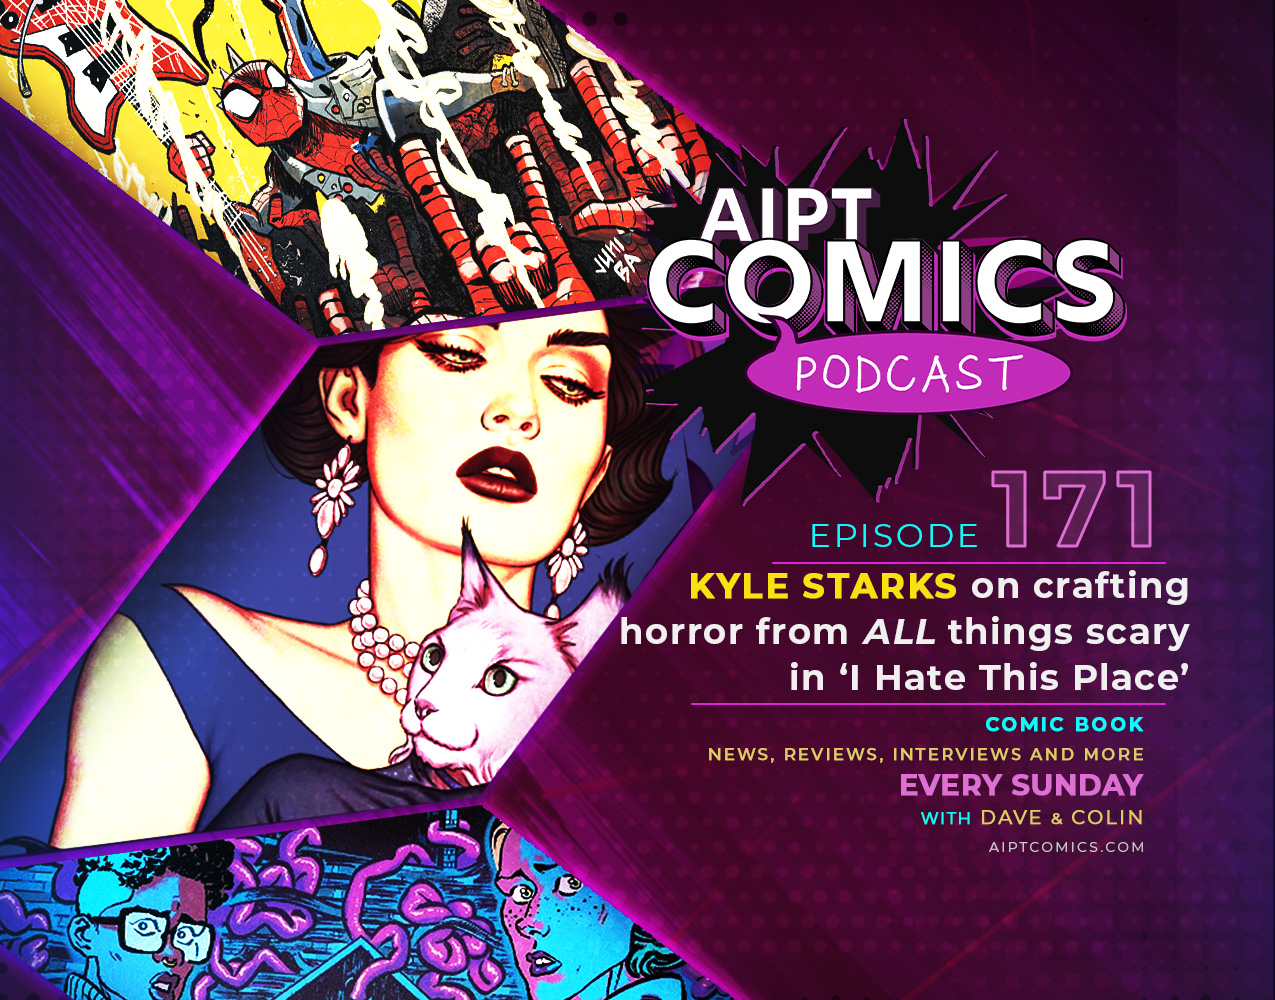 AIPT Comics Podcast Episode 171: Kyle Starks on crafting horror from all things scary in ‘I Hate This Place’